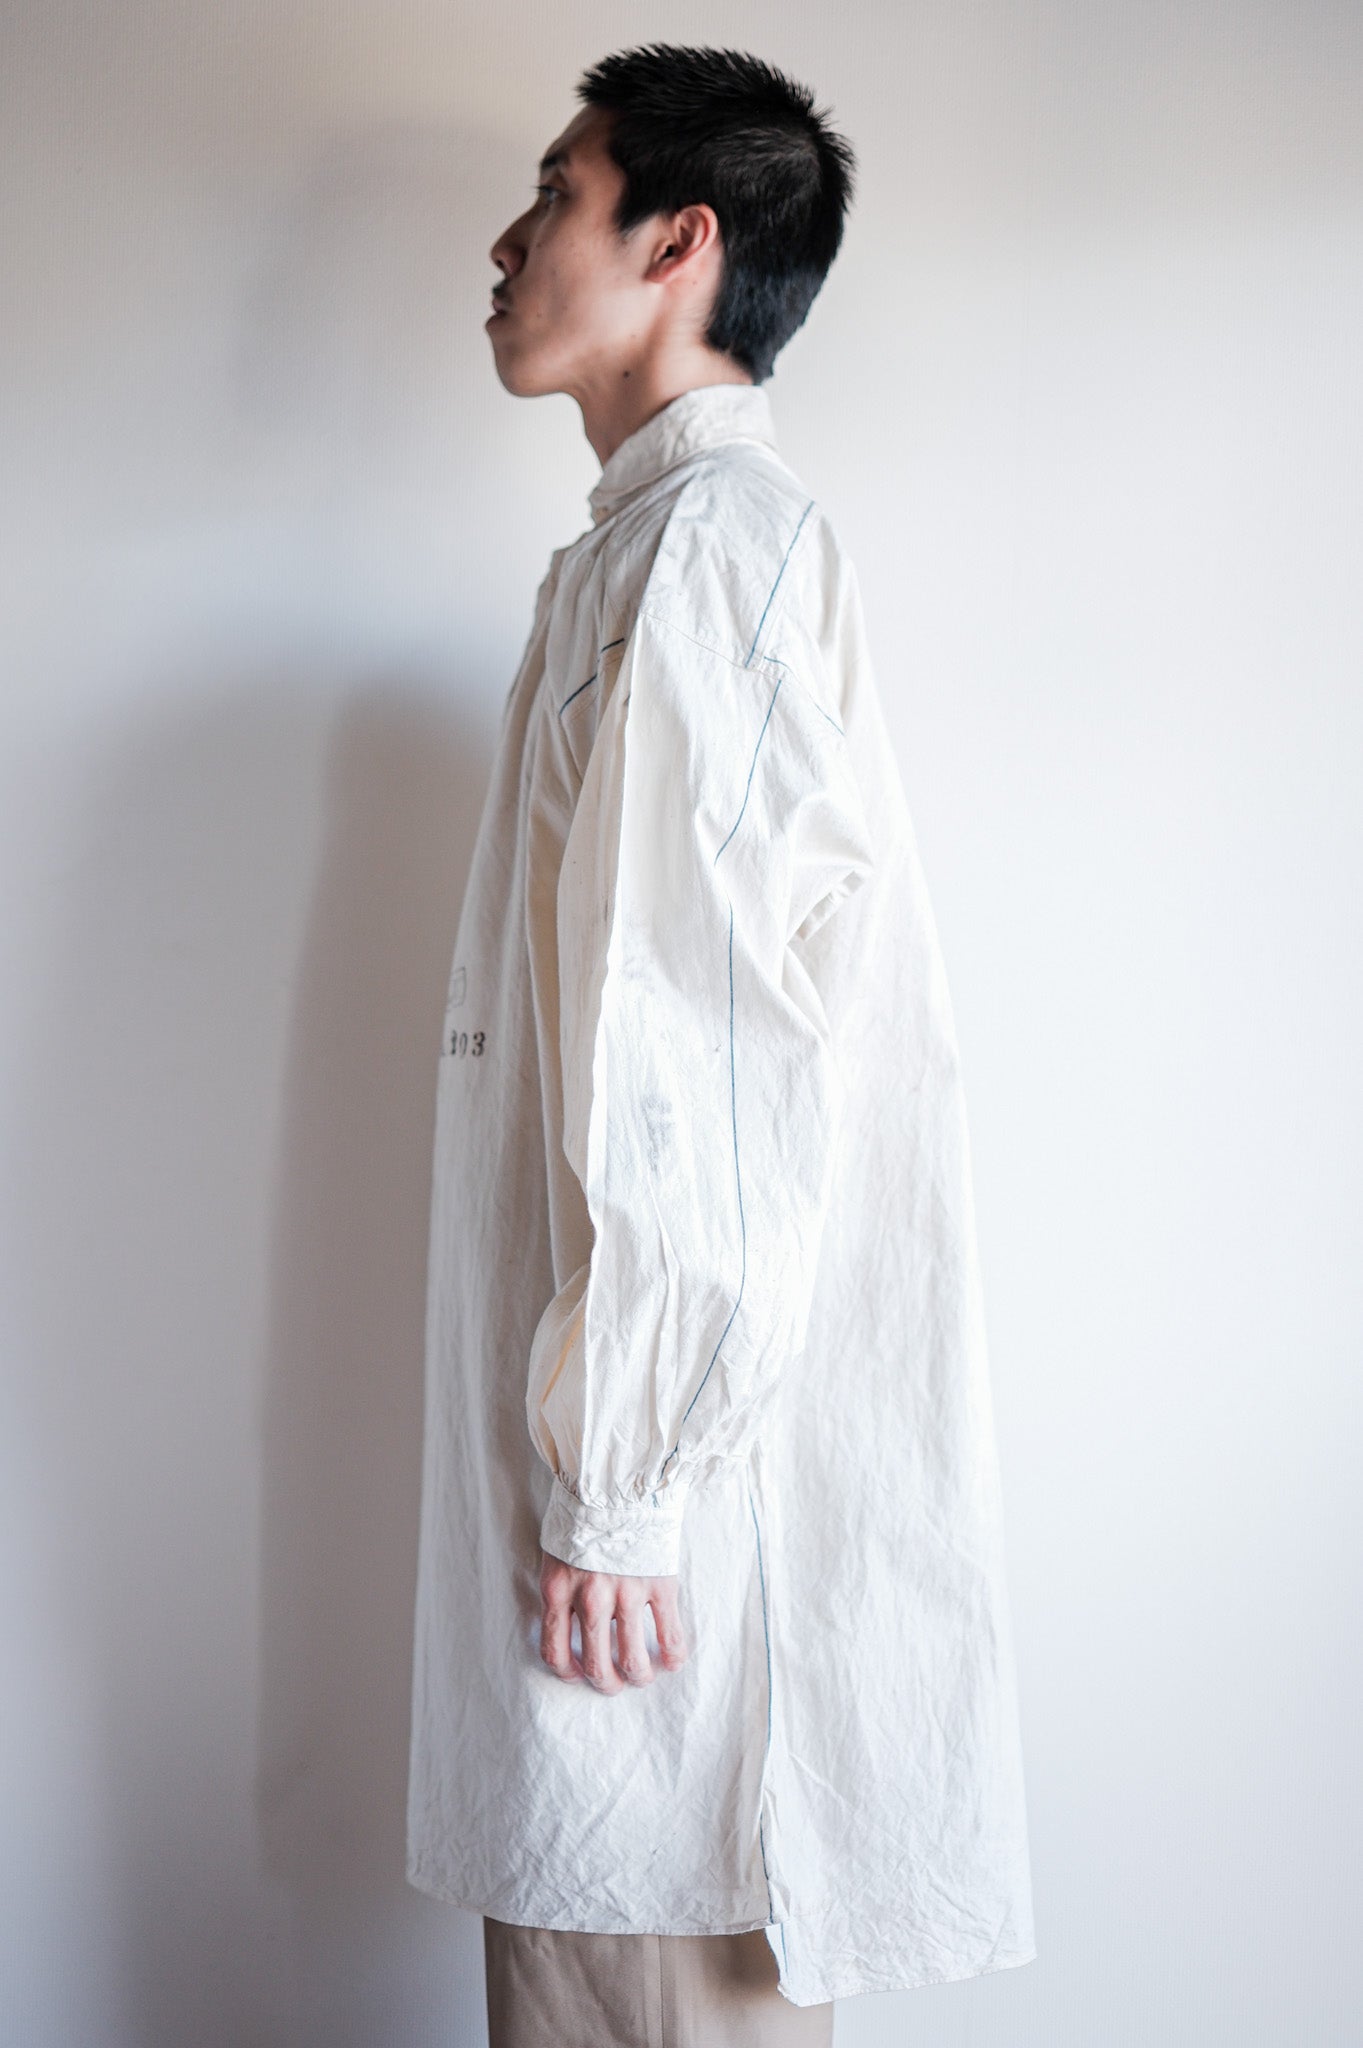 【Late 19th C】French Army of Africa Cotton Linen Coronial Shirt "Dead Stock"